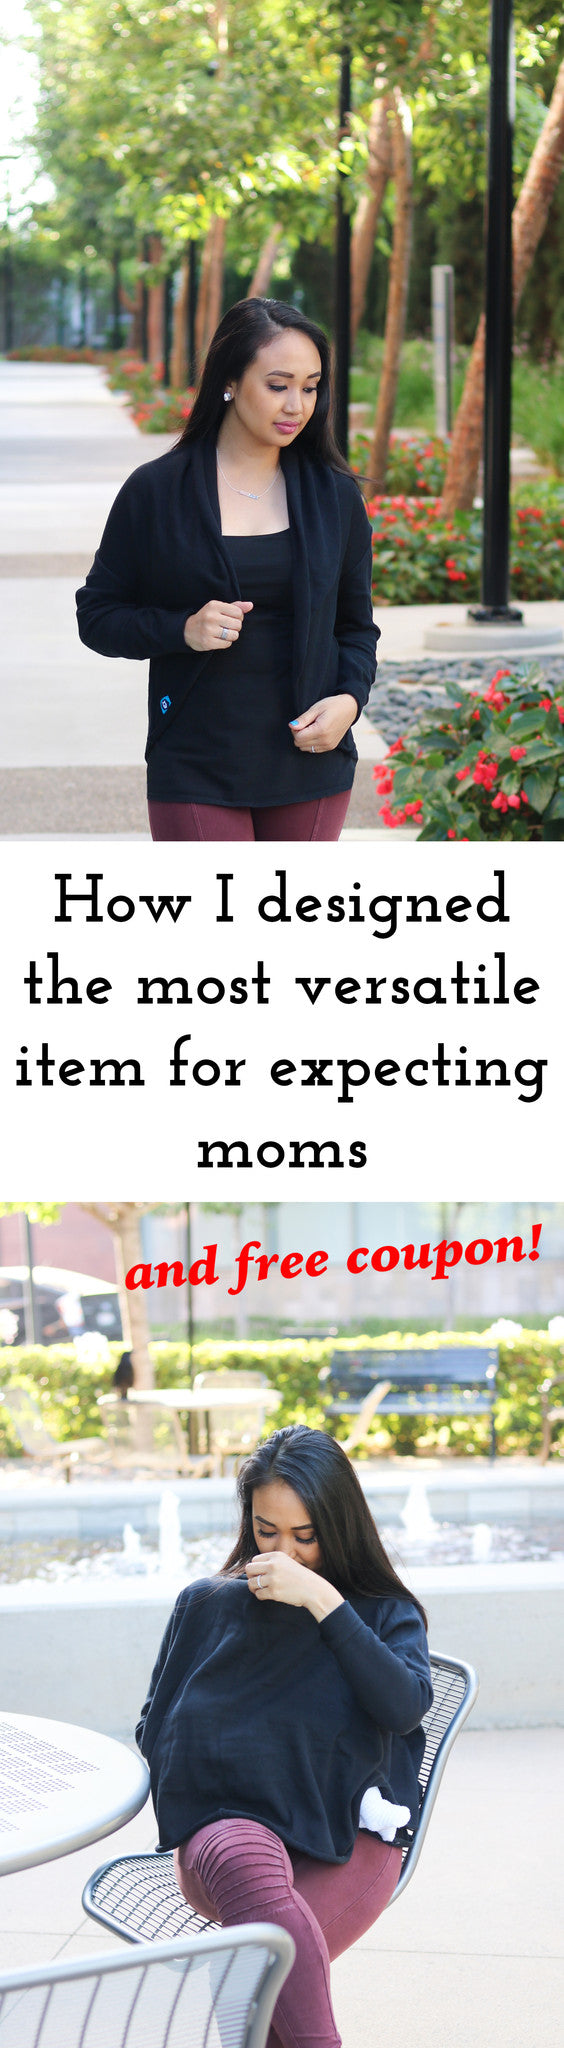 How I designed the most versatile item for expecting moms and free coupon included! (see below)